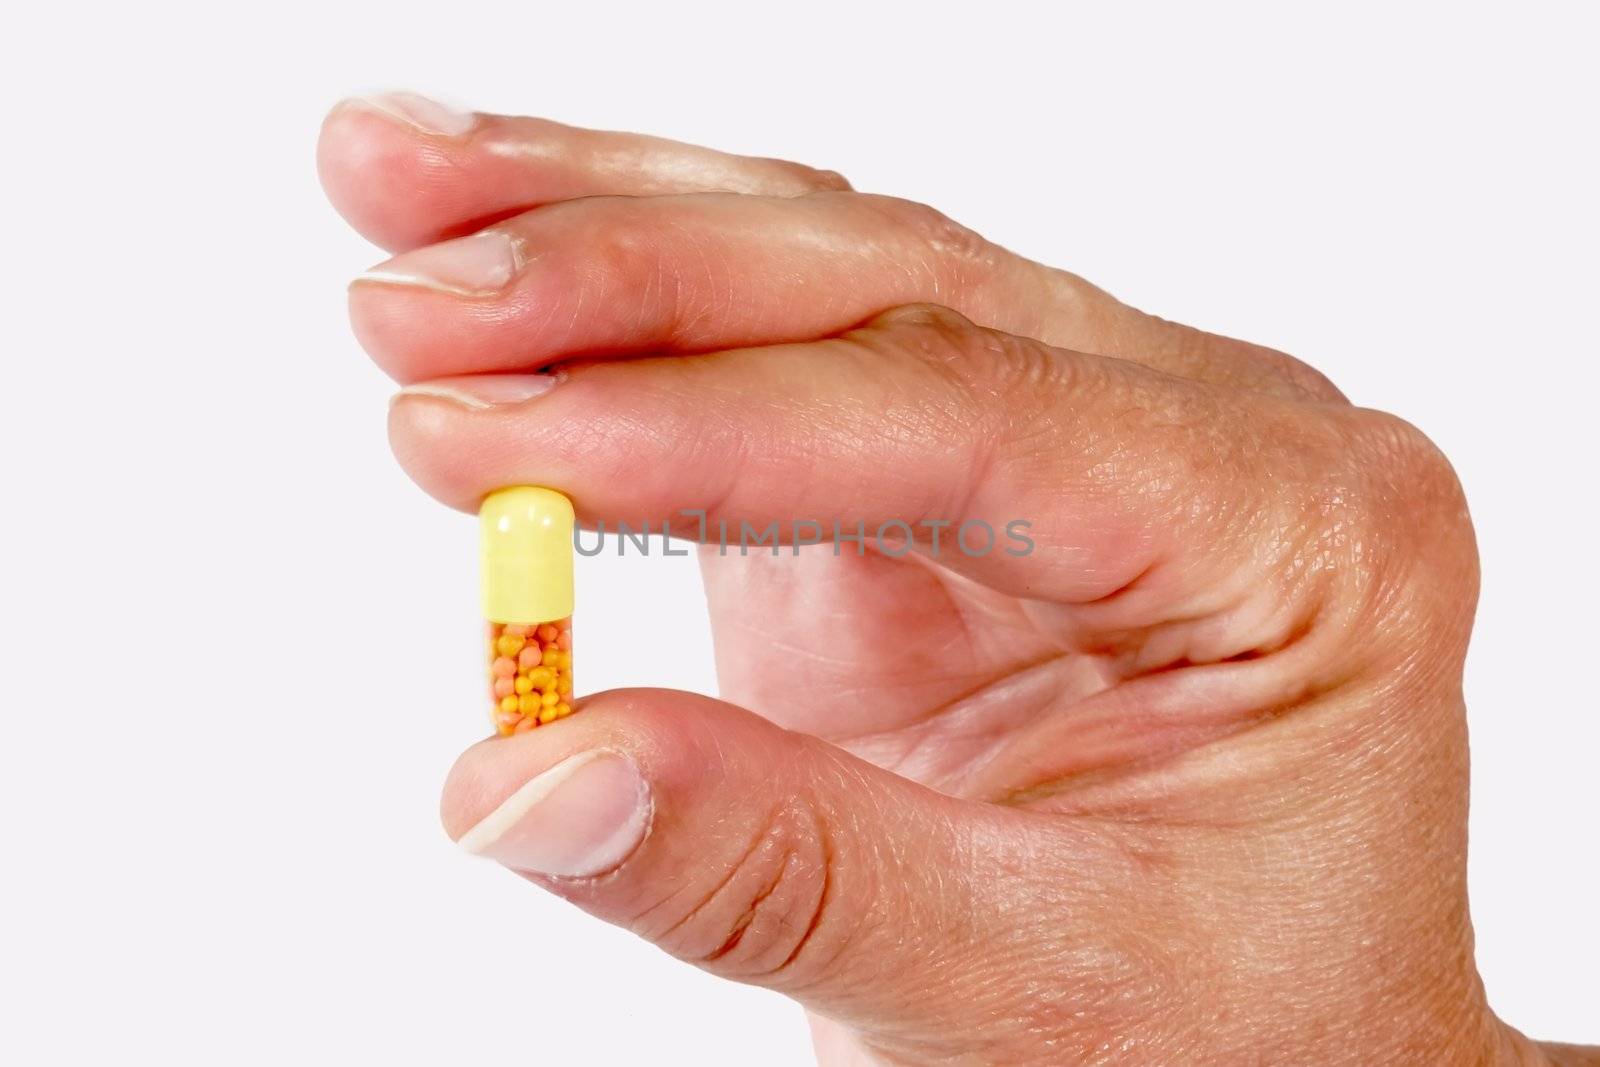 Capsule in a Hand by Teamarbeit